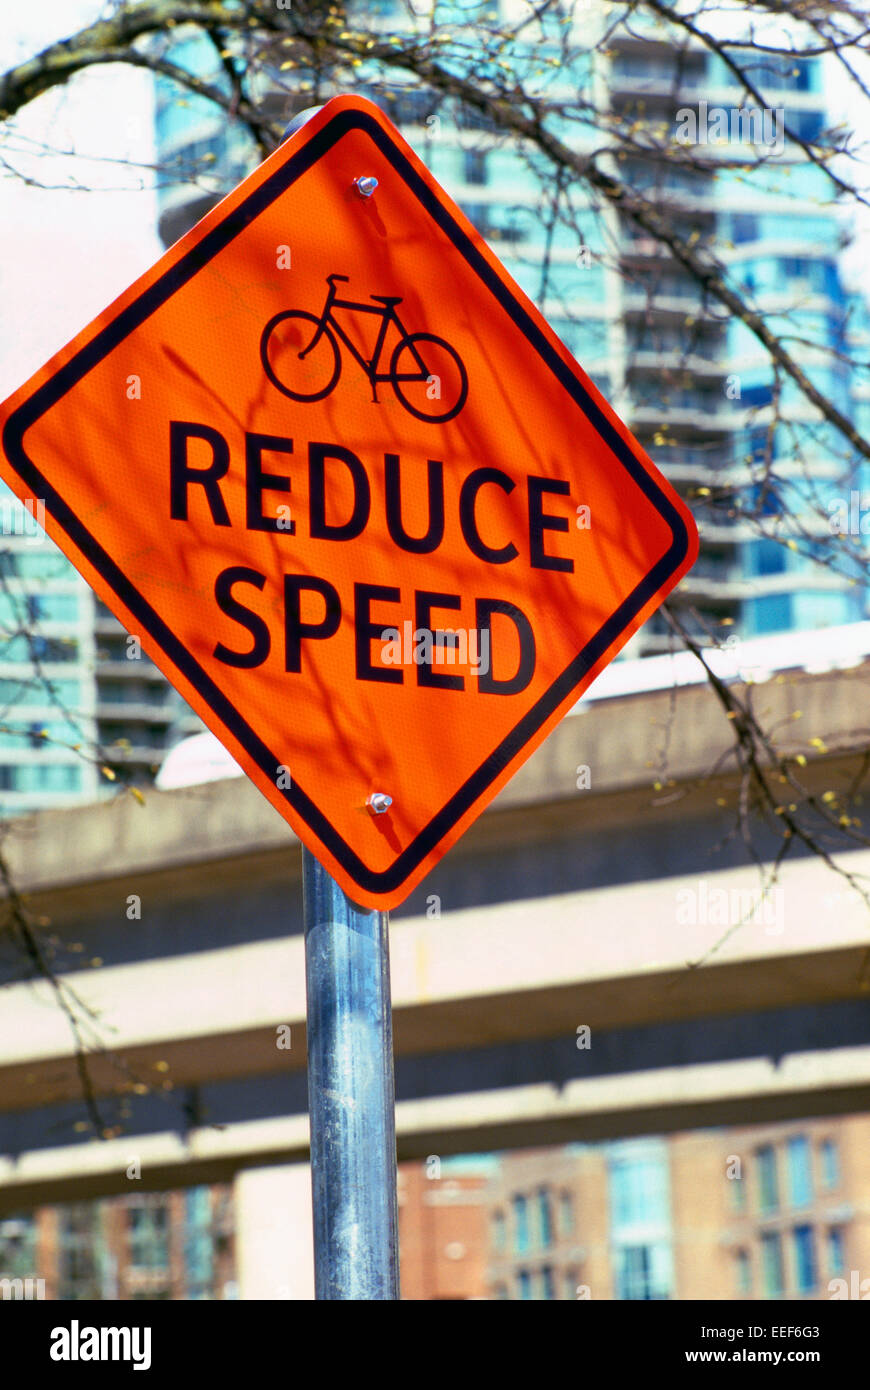 Warning Caution Road Sign - Reduce Speed, Bicycle Stock Photo